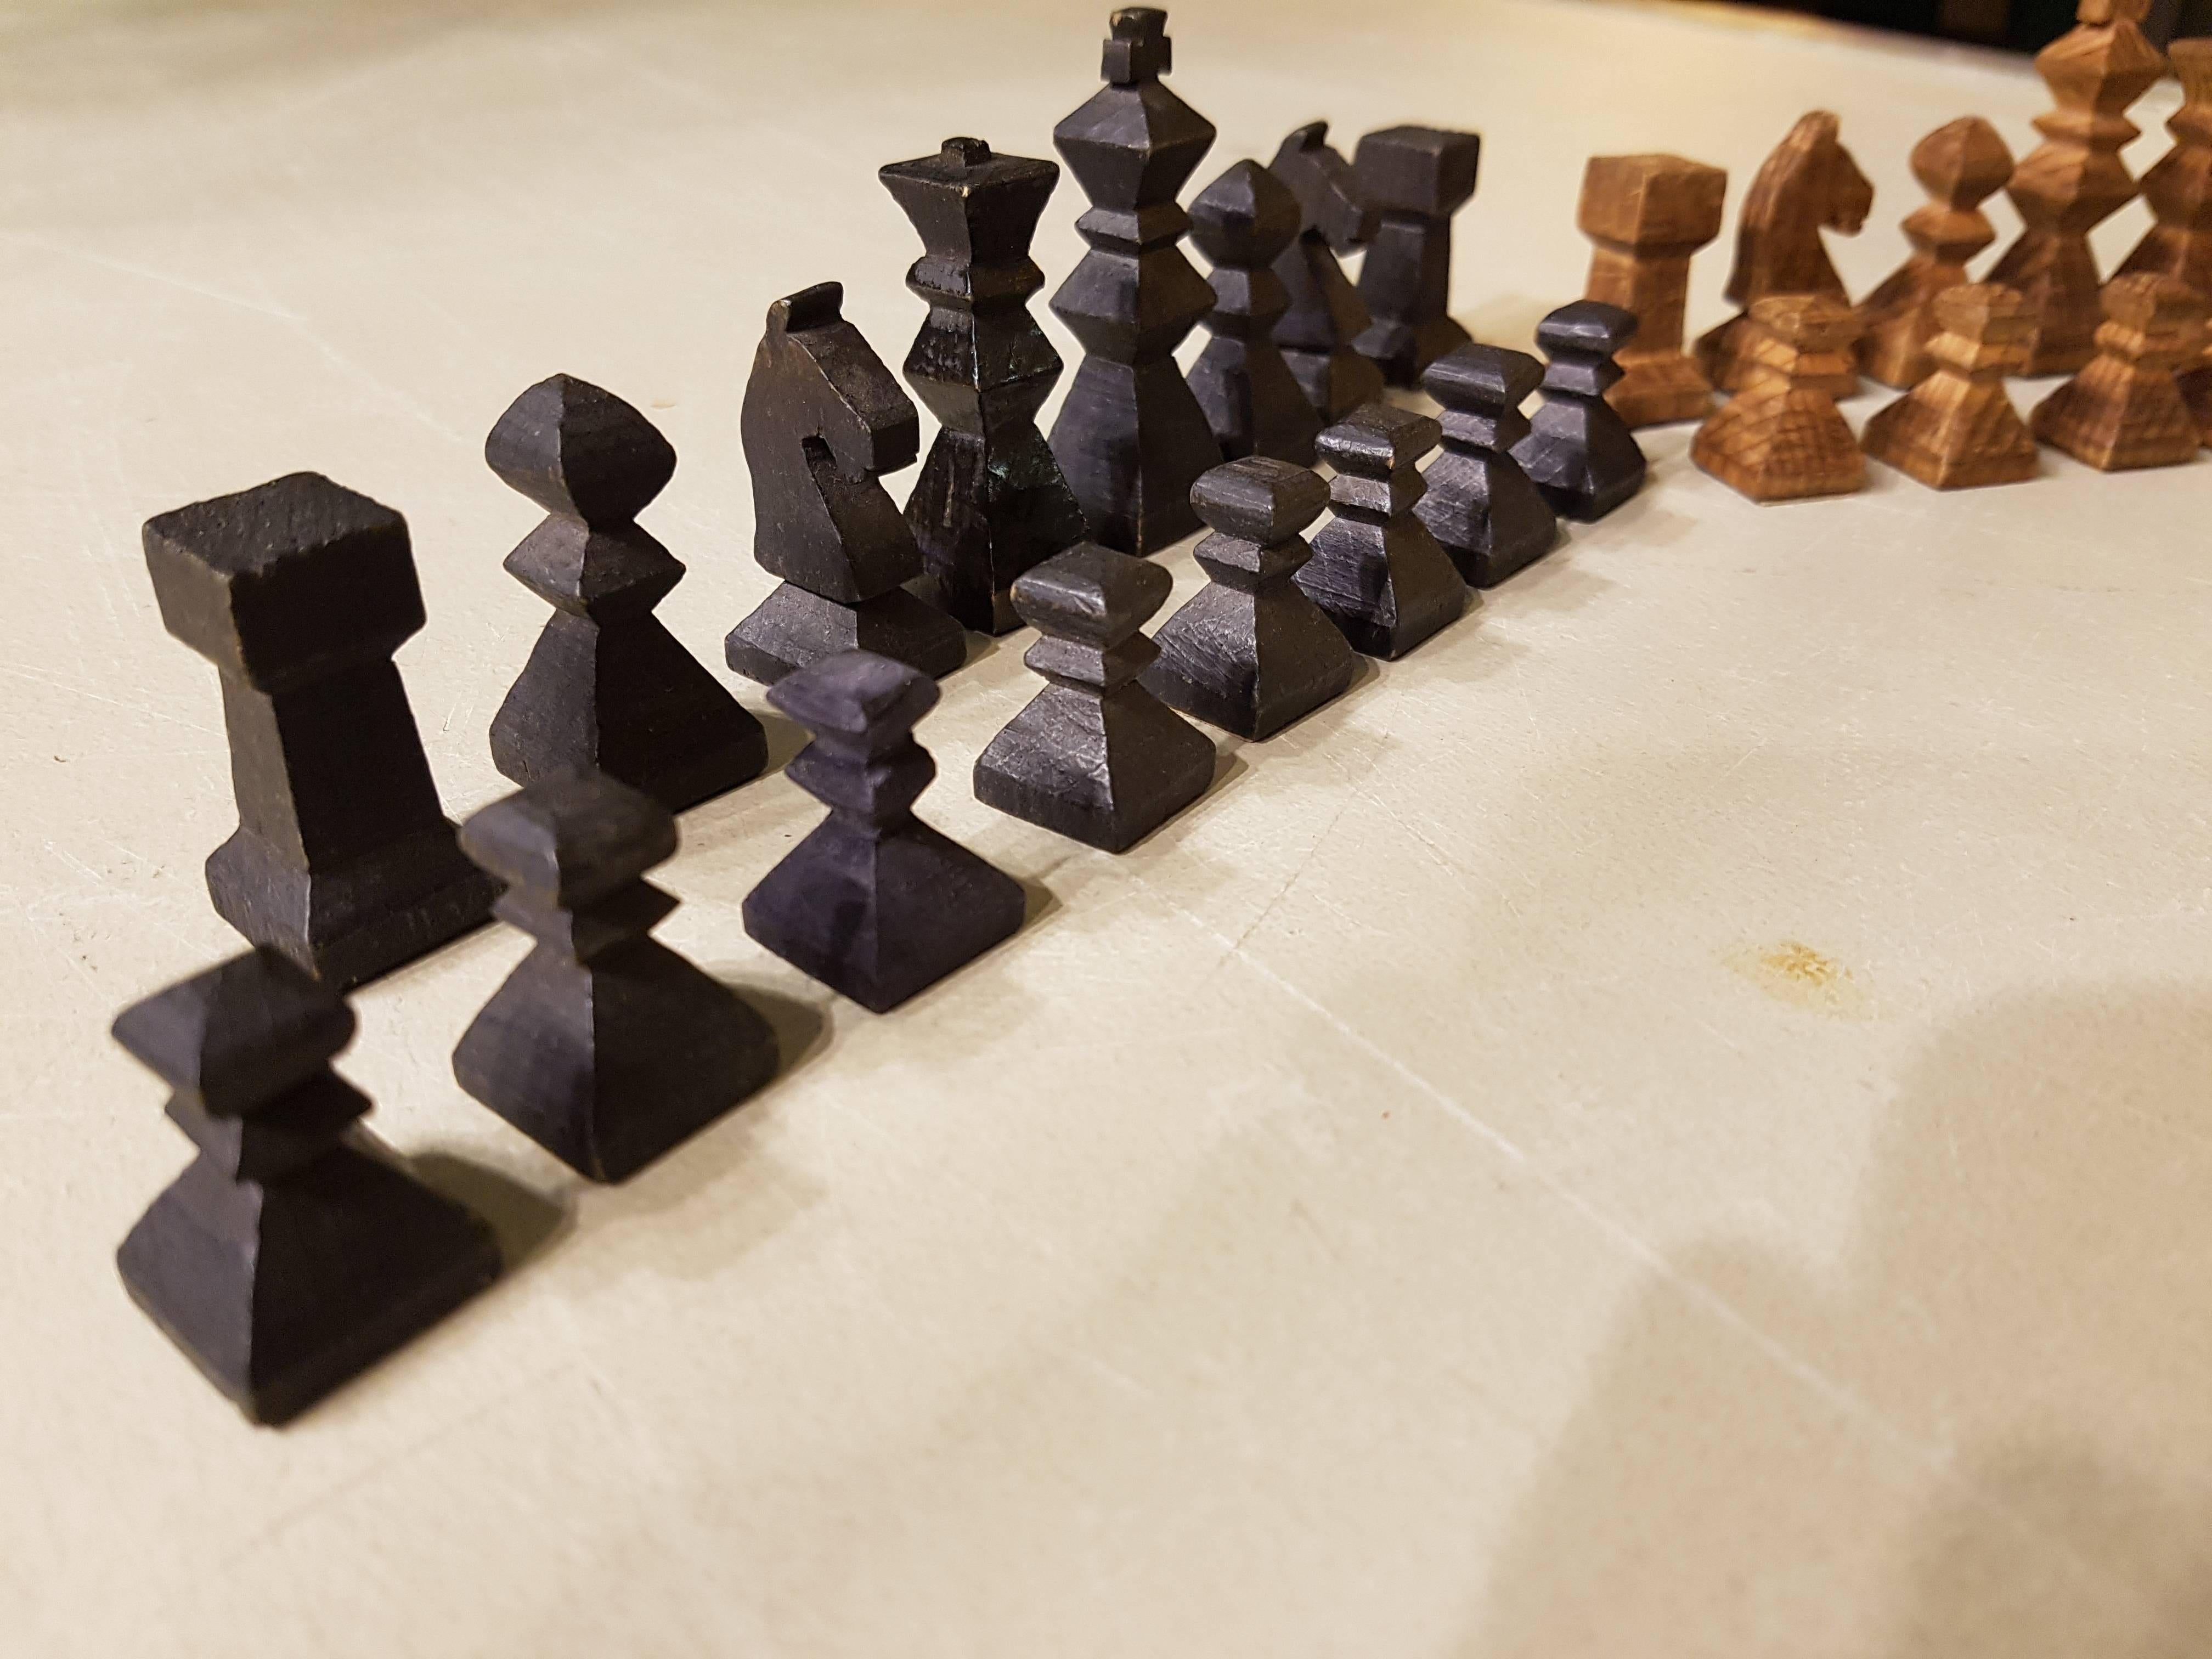 20th century French Art Deco chess pieces made of maple from the 1940s.